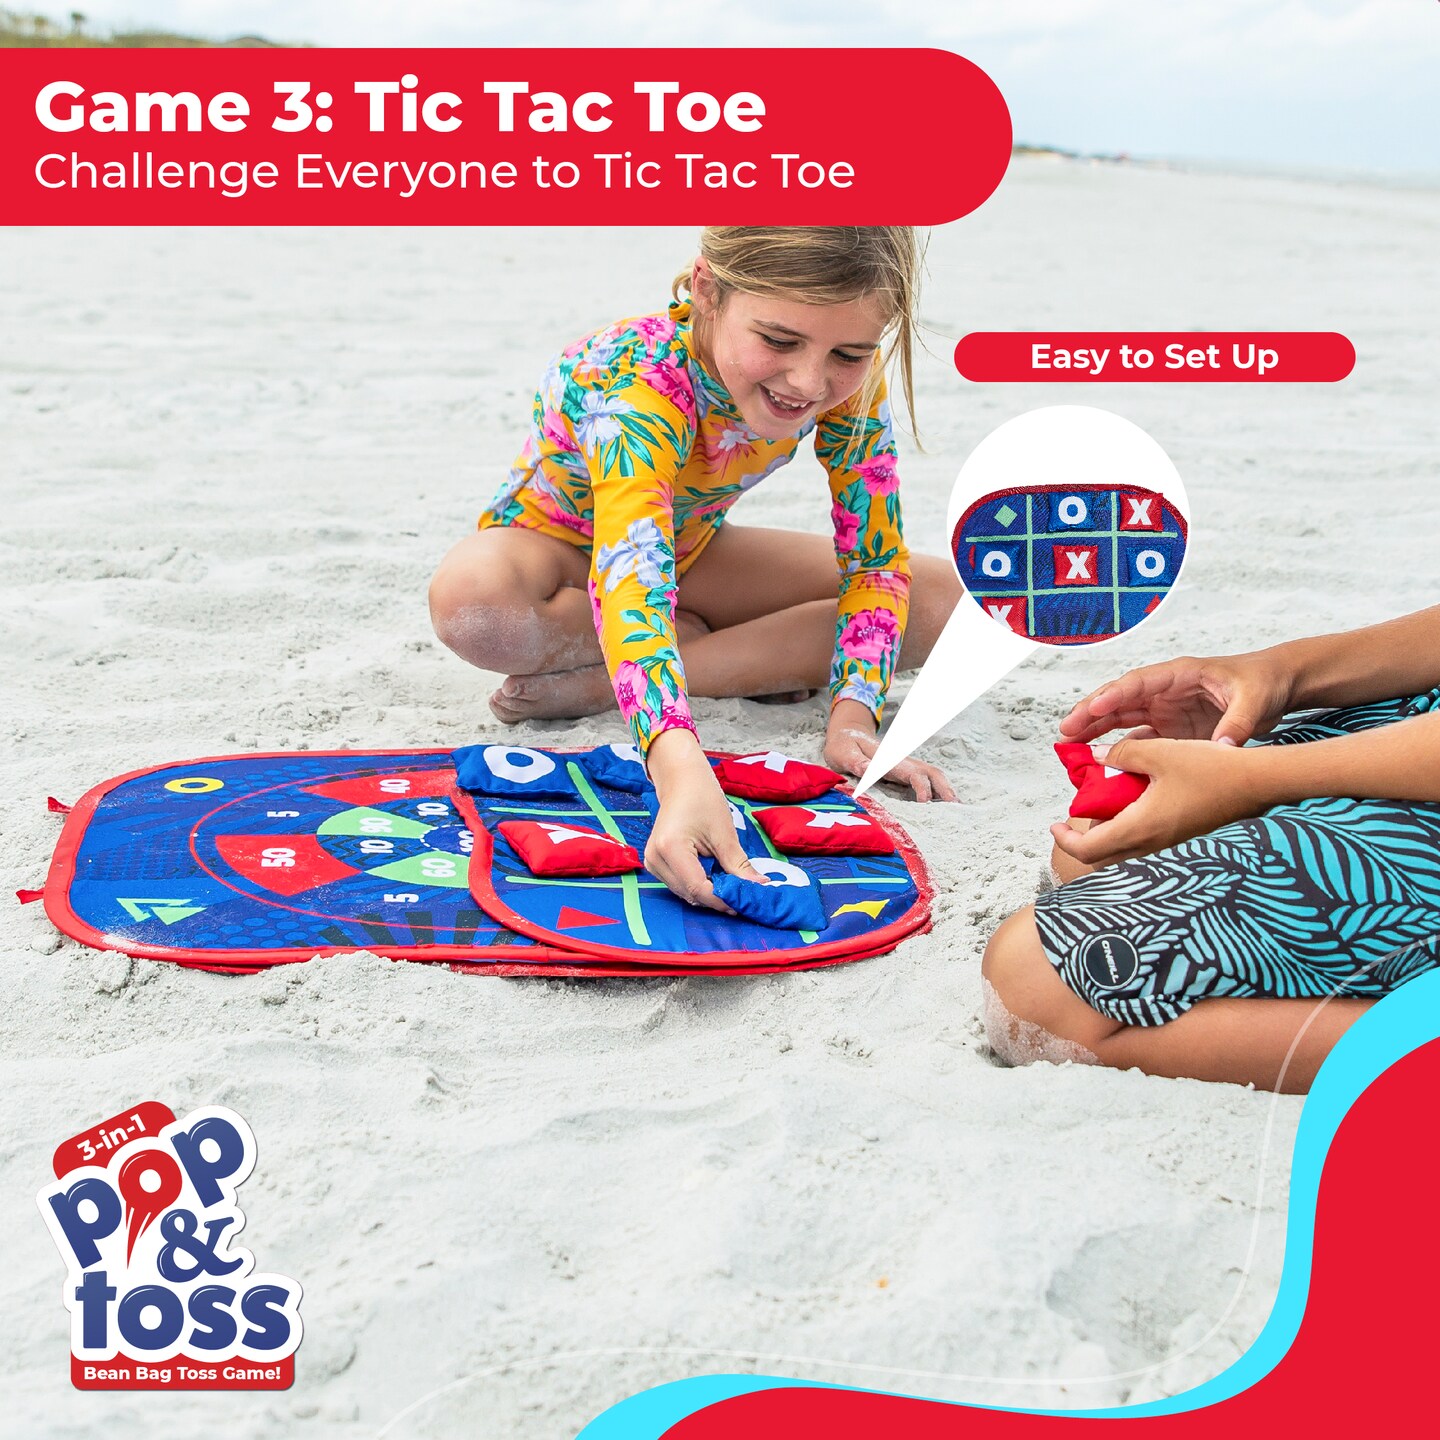 USA Toyz Pop n Toss Bean Bag Toss Game for Kids Toddlers- 3in1